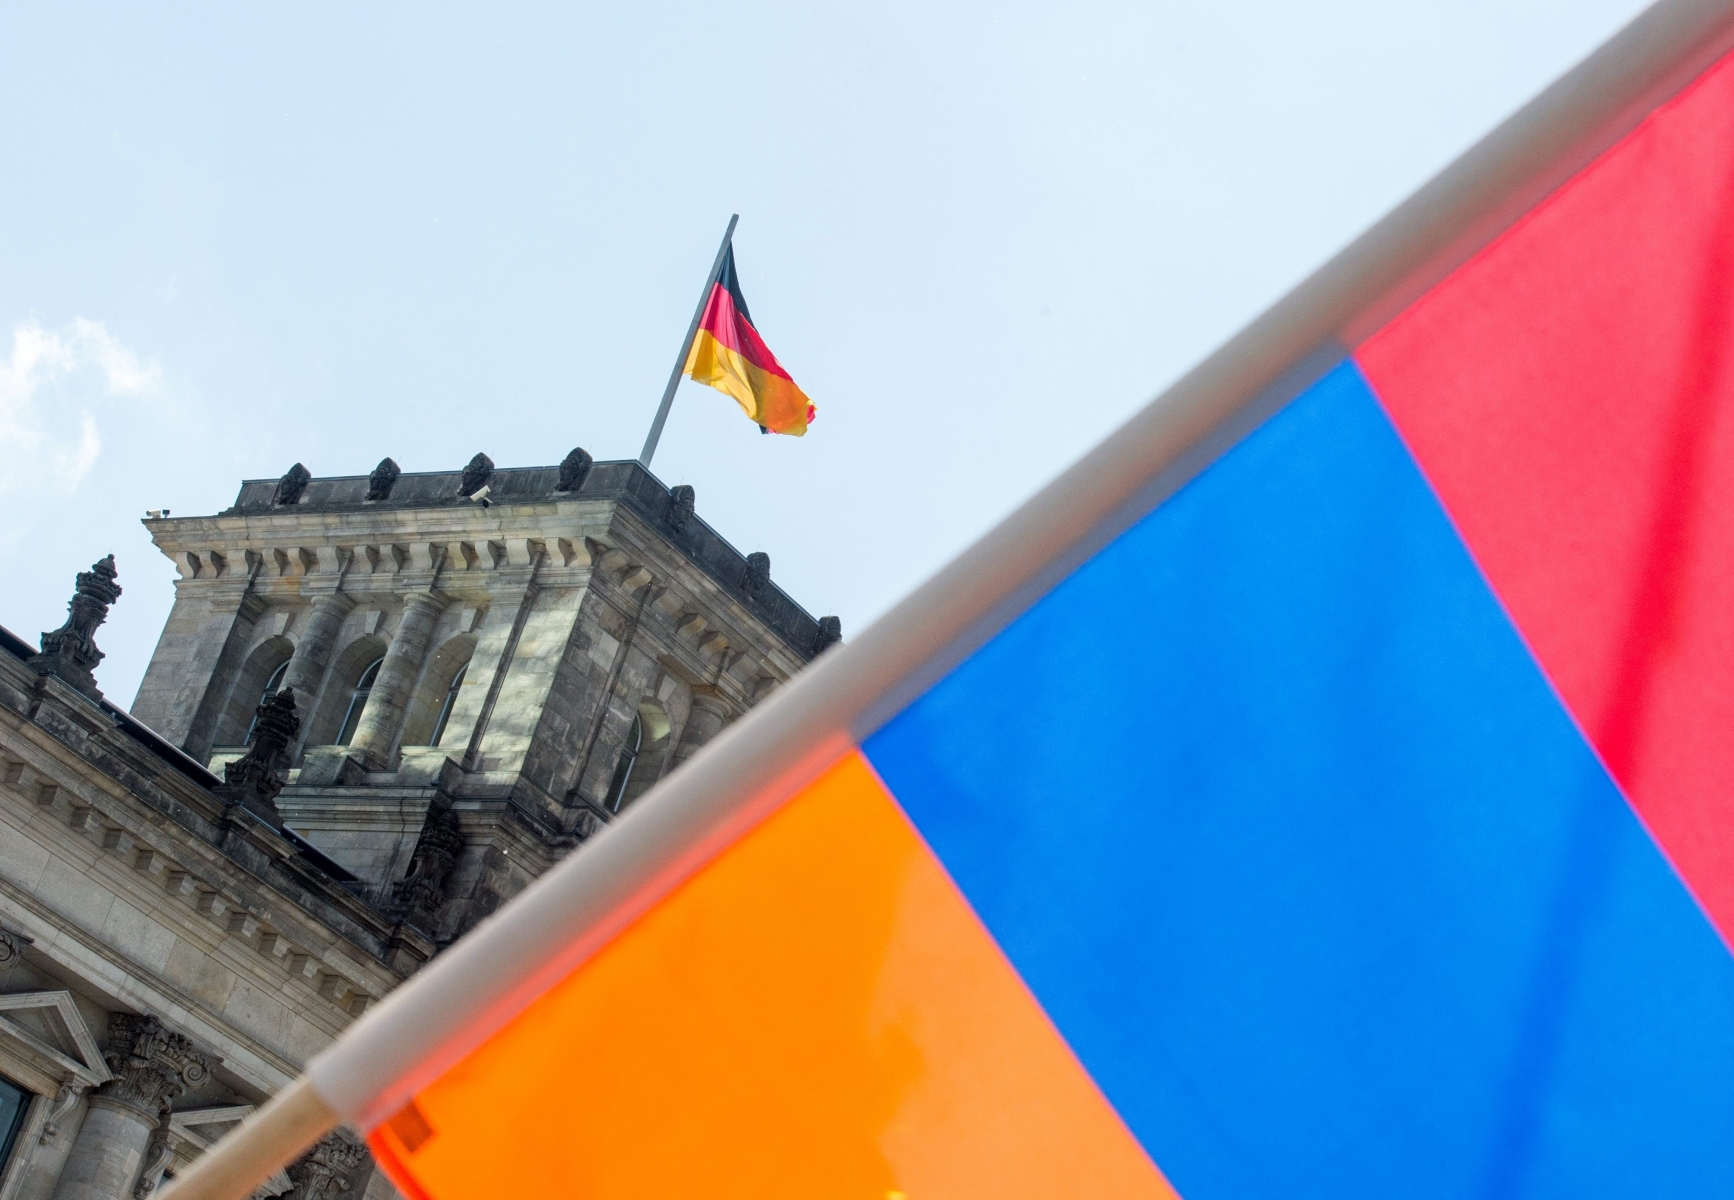 epa05342327 An Armenian flag in front of the Reichstag building in Berlin, Germany, 02 June 2016. The German Bundestag adopted a resolution to name the 1915/16 massacre of the Armeinians by the Ottoman Empire as genocide. Turkey, the legal successor of the Ottoman Empire, had cautioned against the acceptance of the resolution.  EPA/ALEXANDER HEINL GERMANY PARLIAMENT TURKEY ARMENIA GENOCIDE